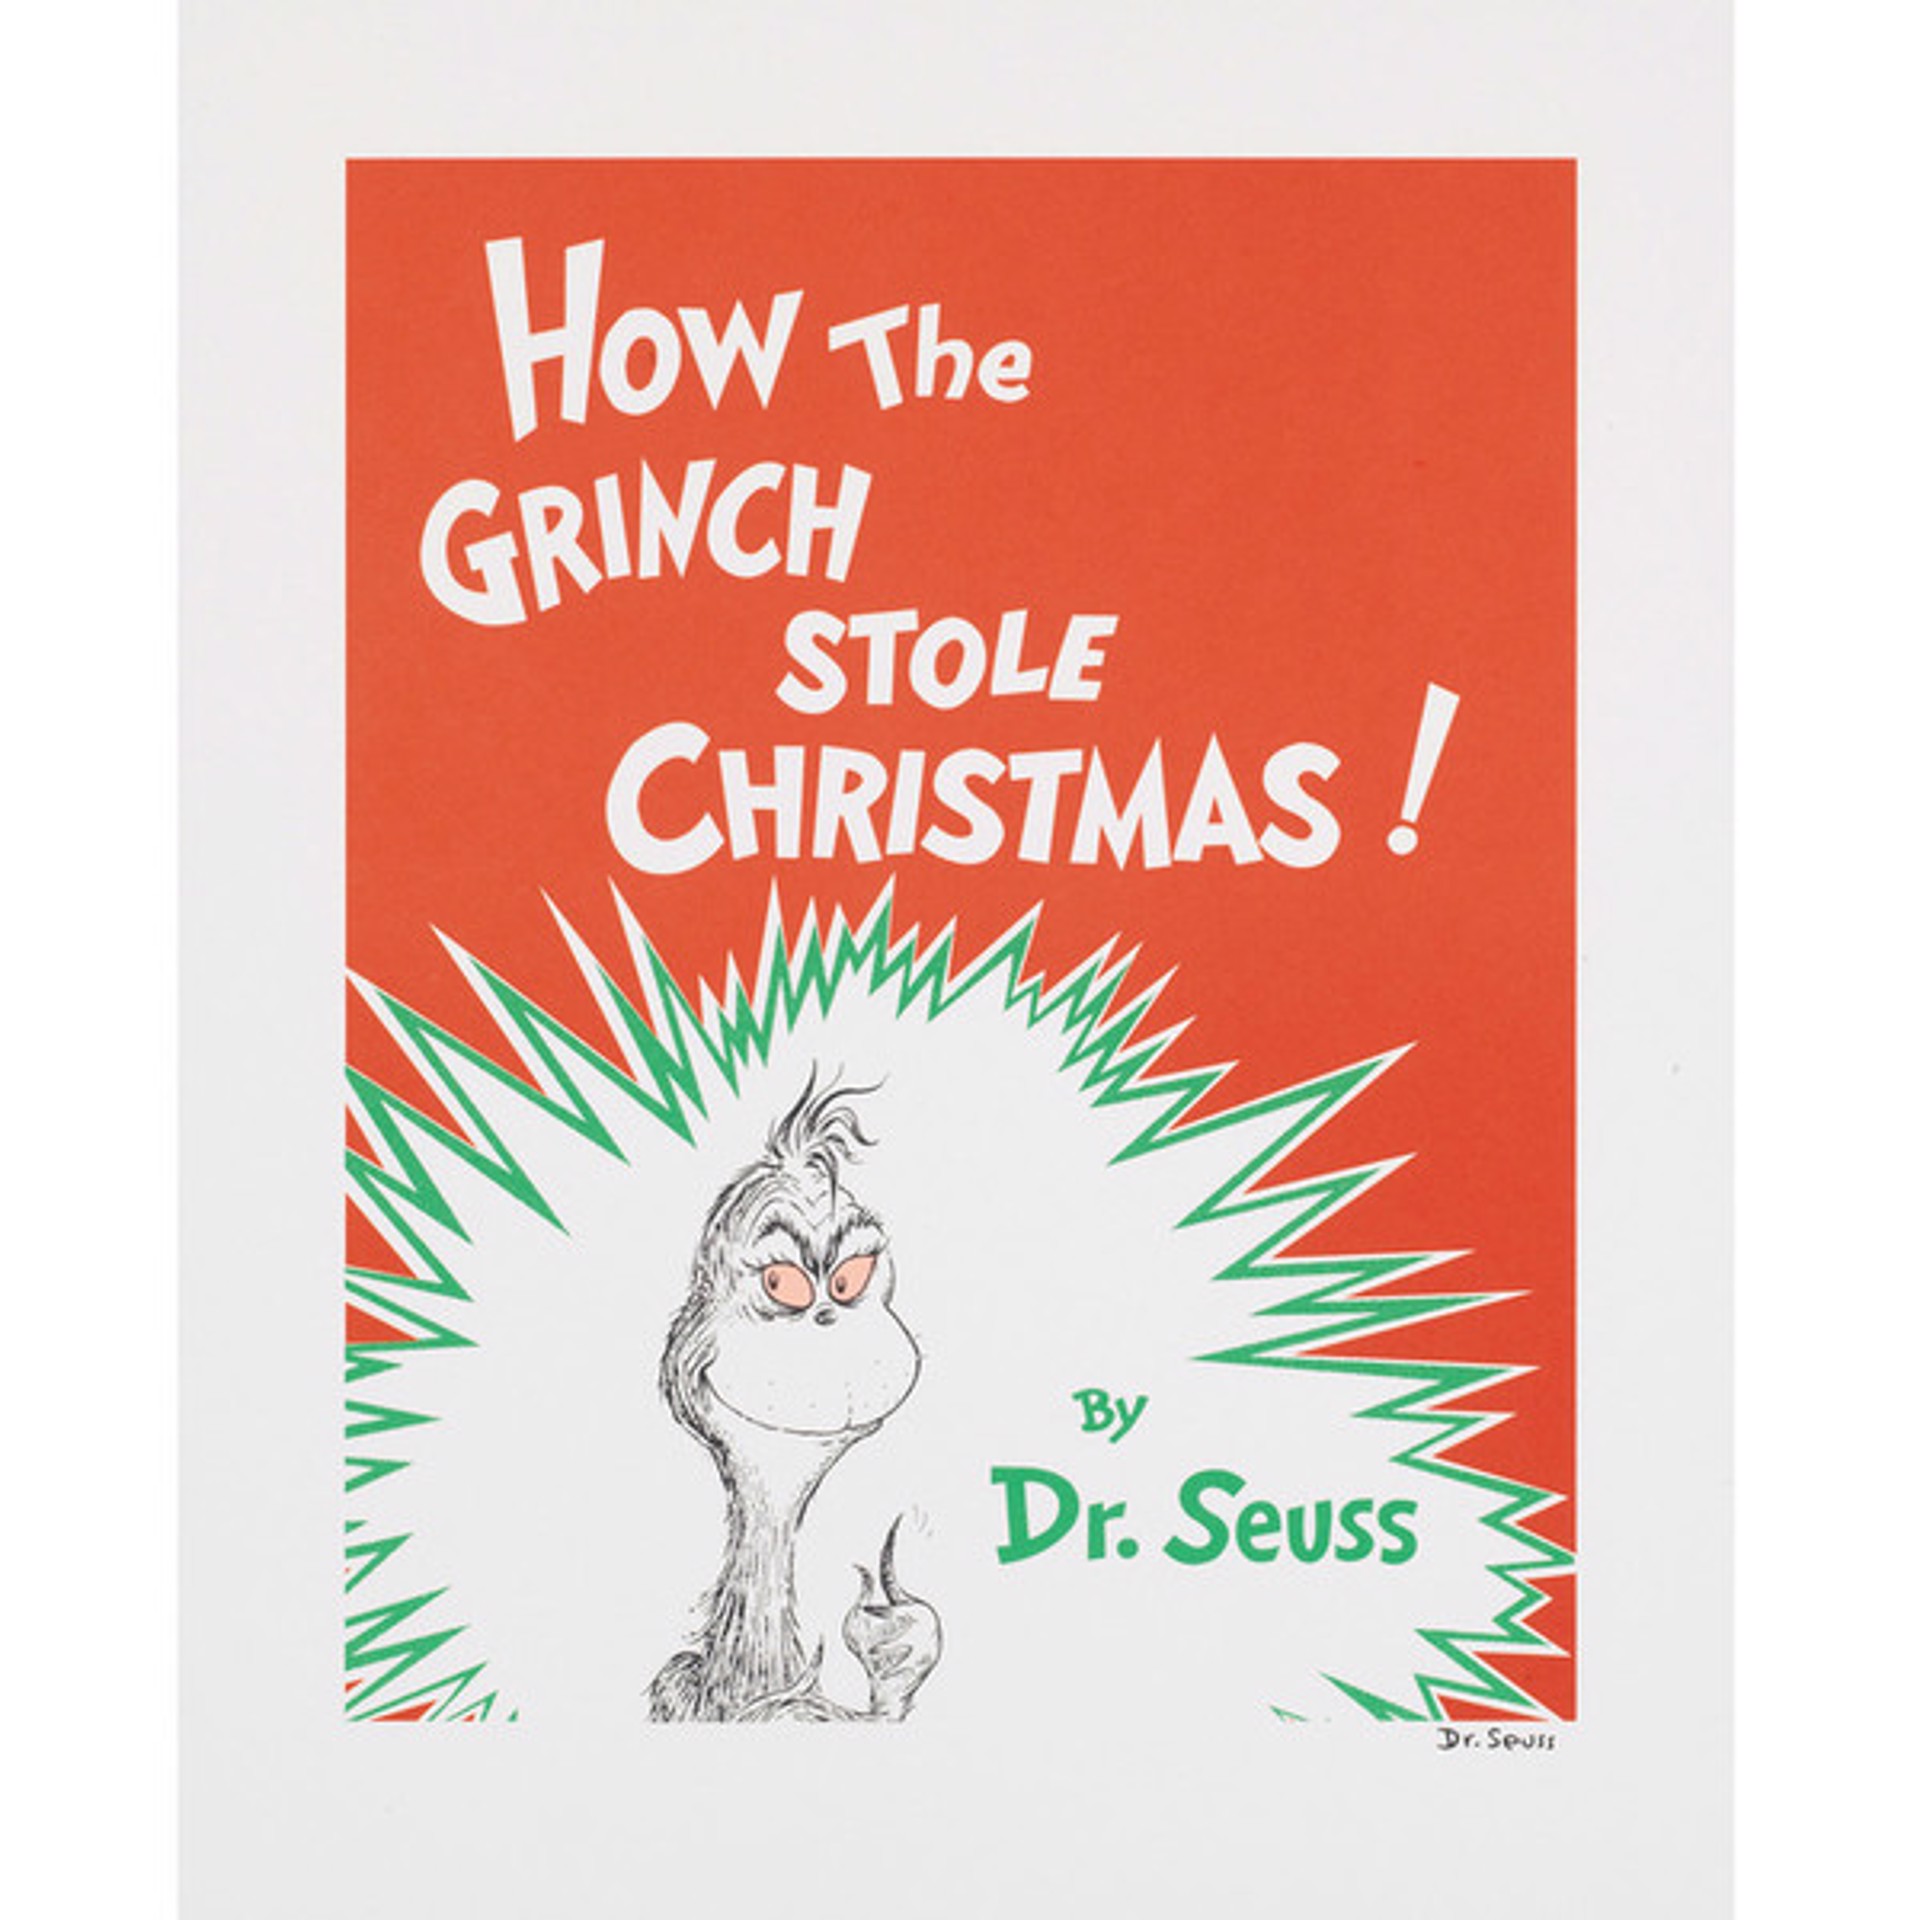 How the Grinch Stole Christmas - Book Cover by Theodor Seuss Geisel